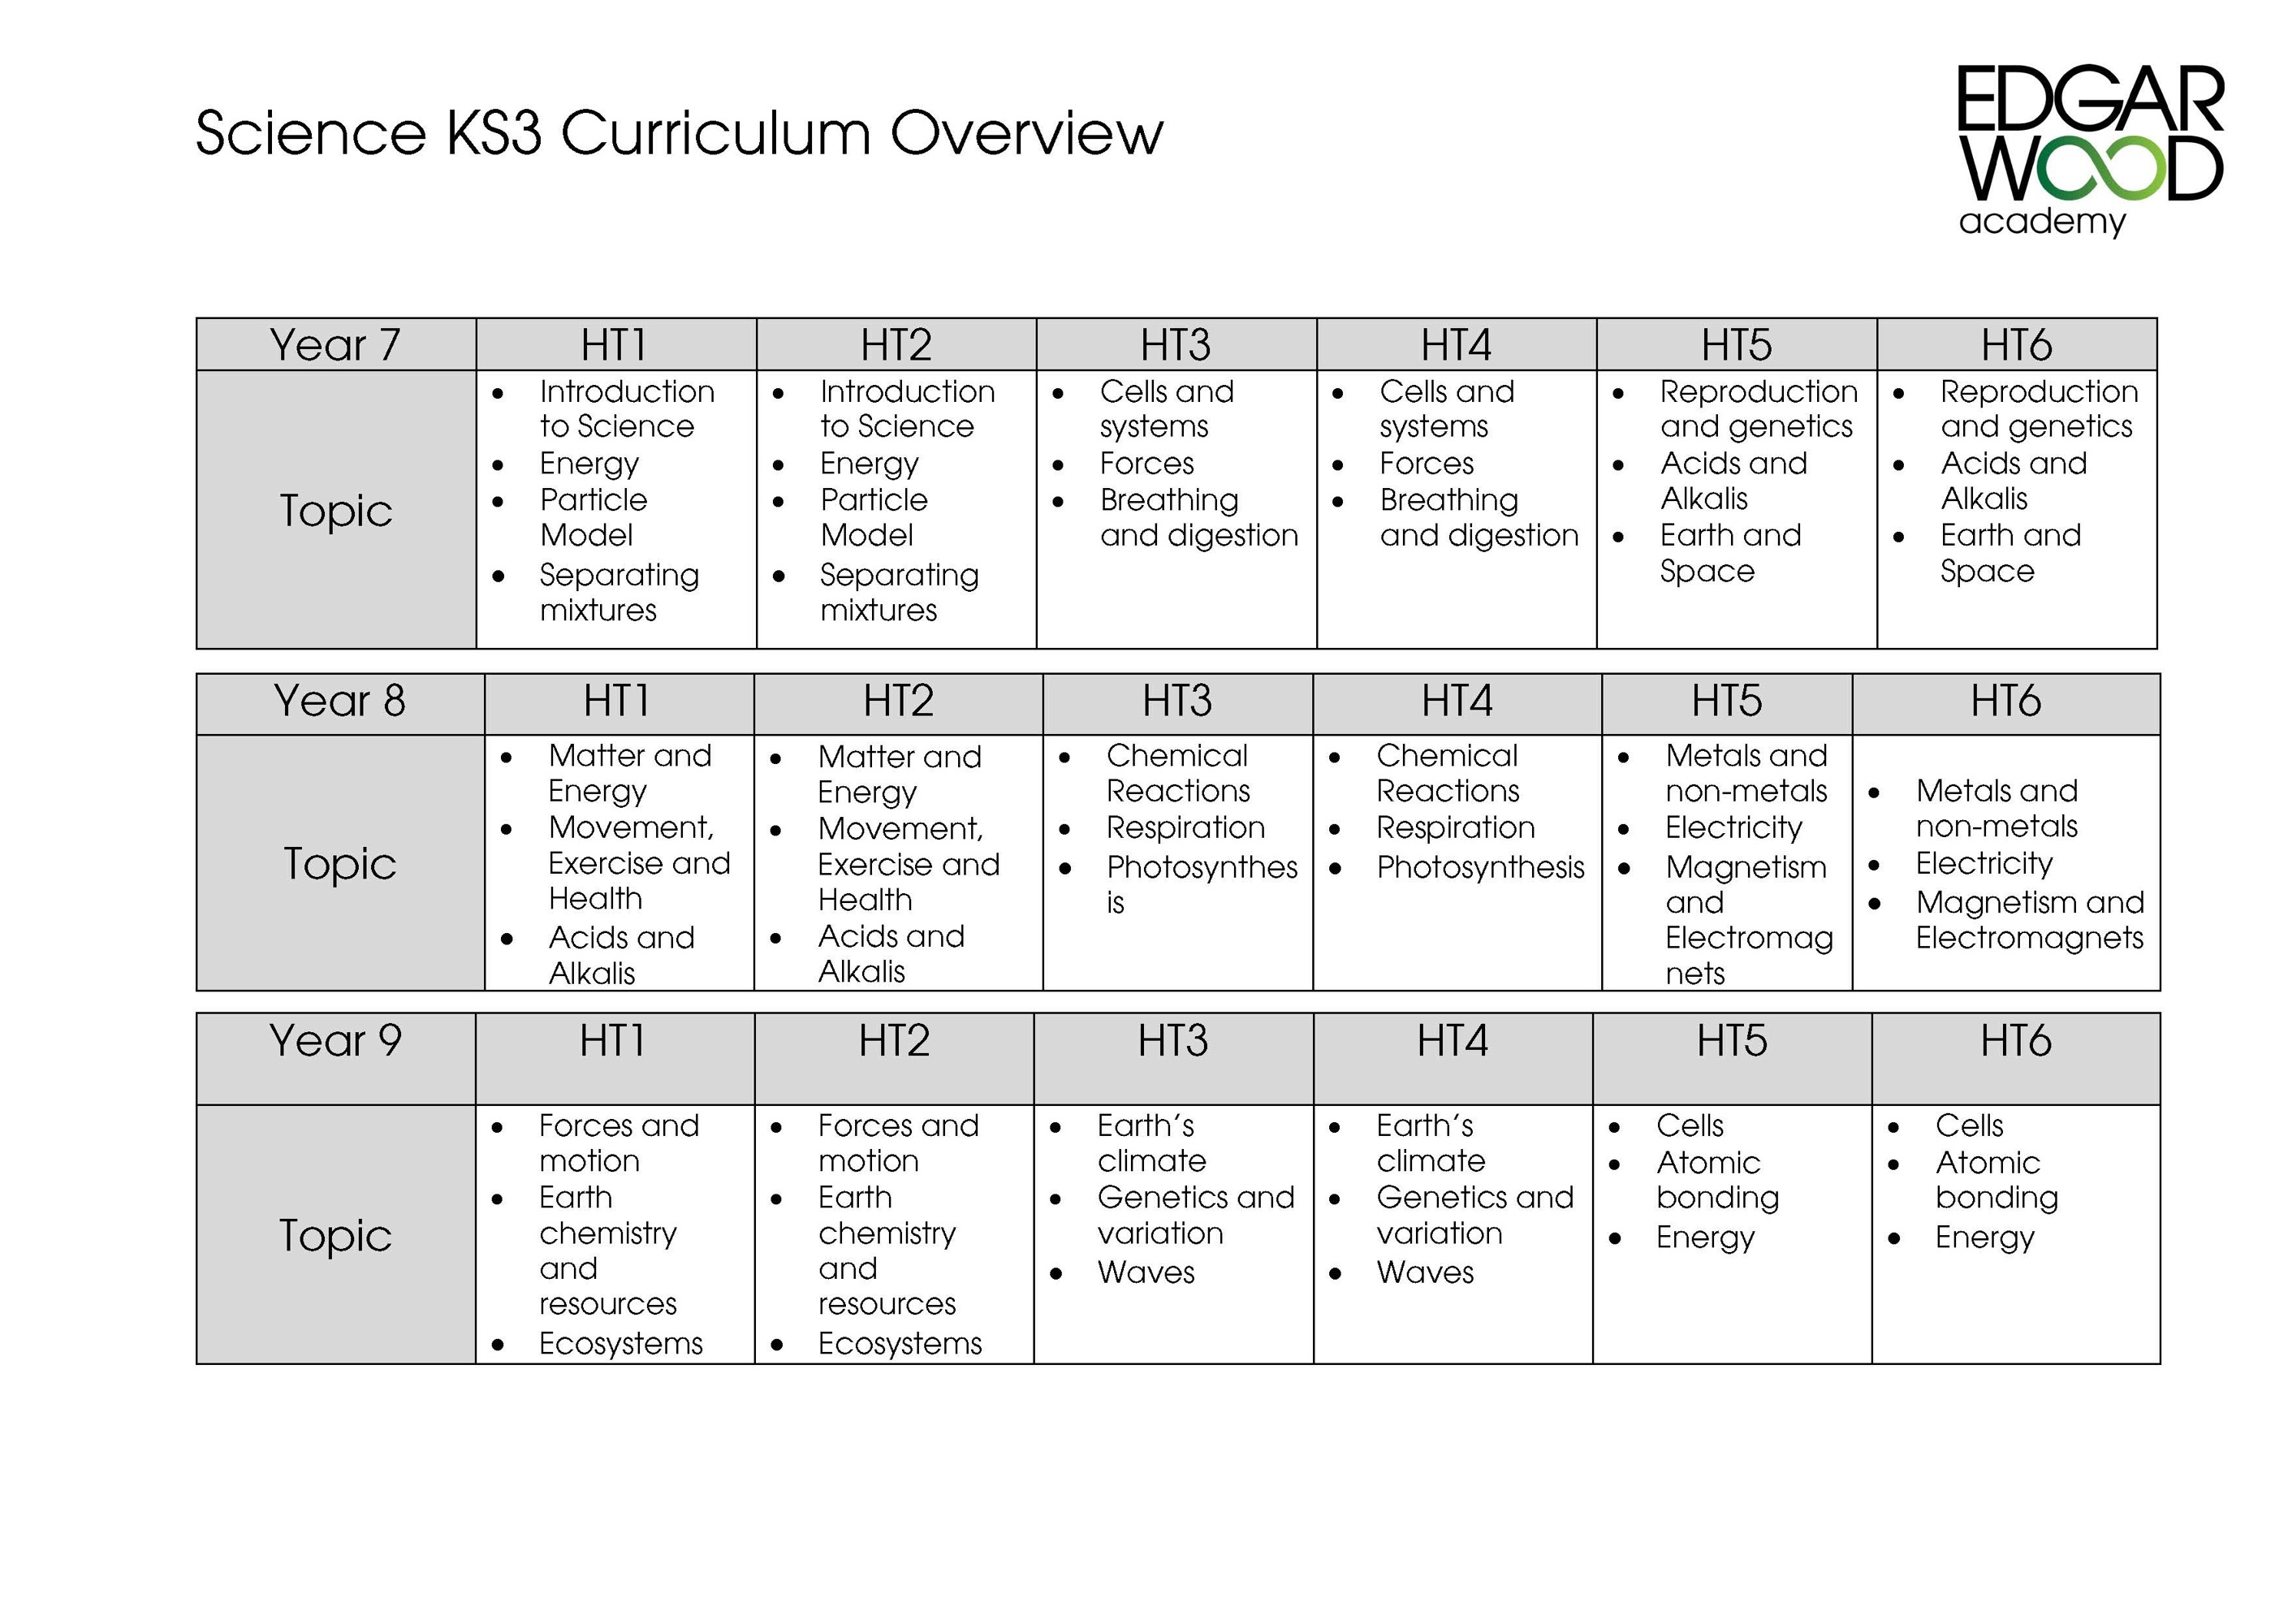 Science Curriculum overview Page 1